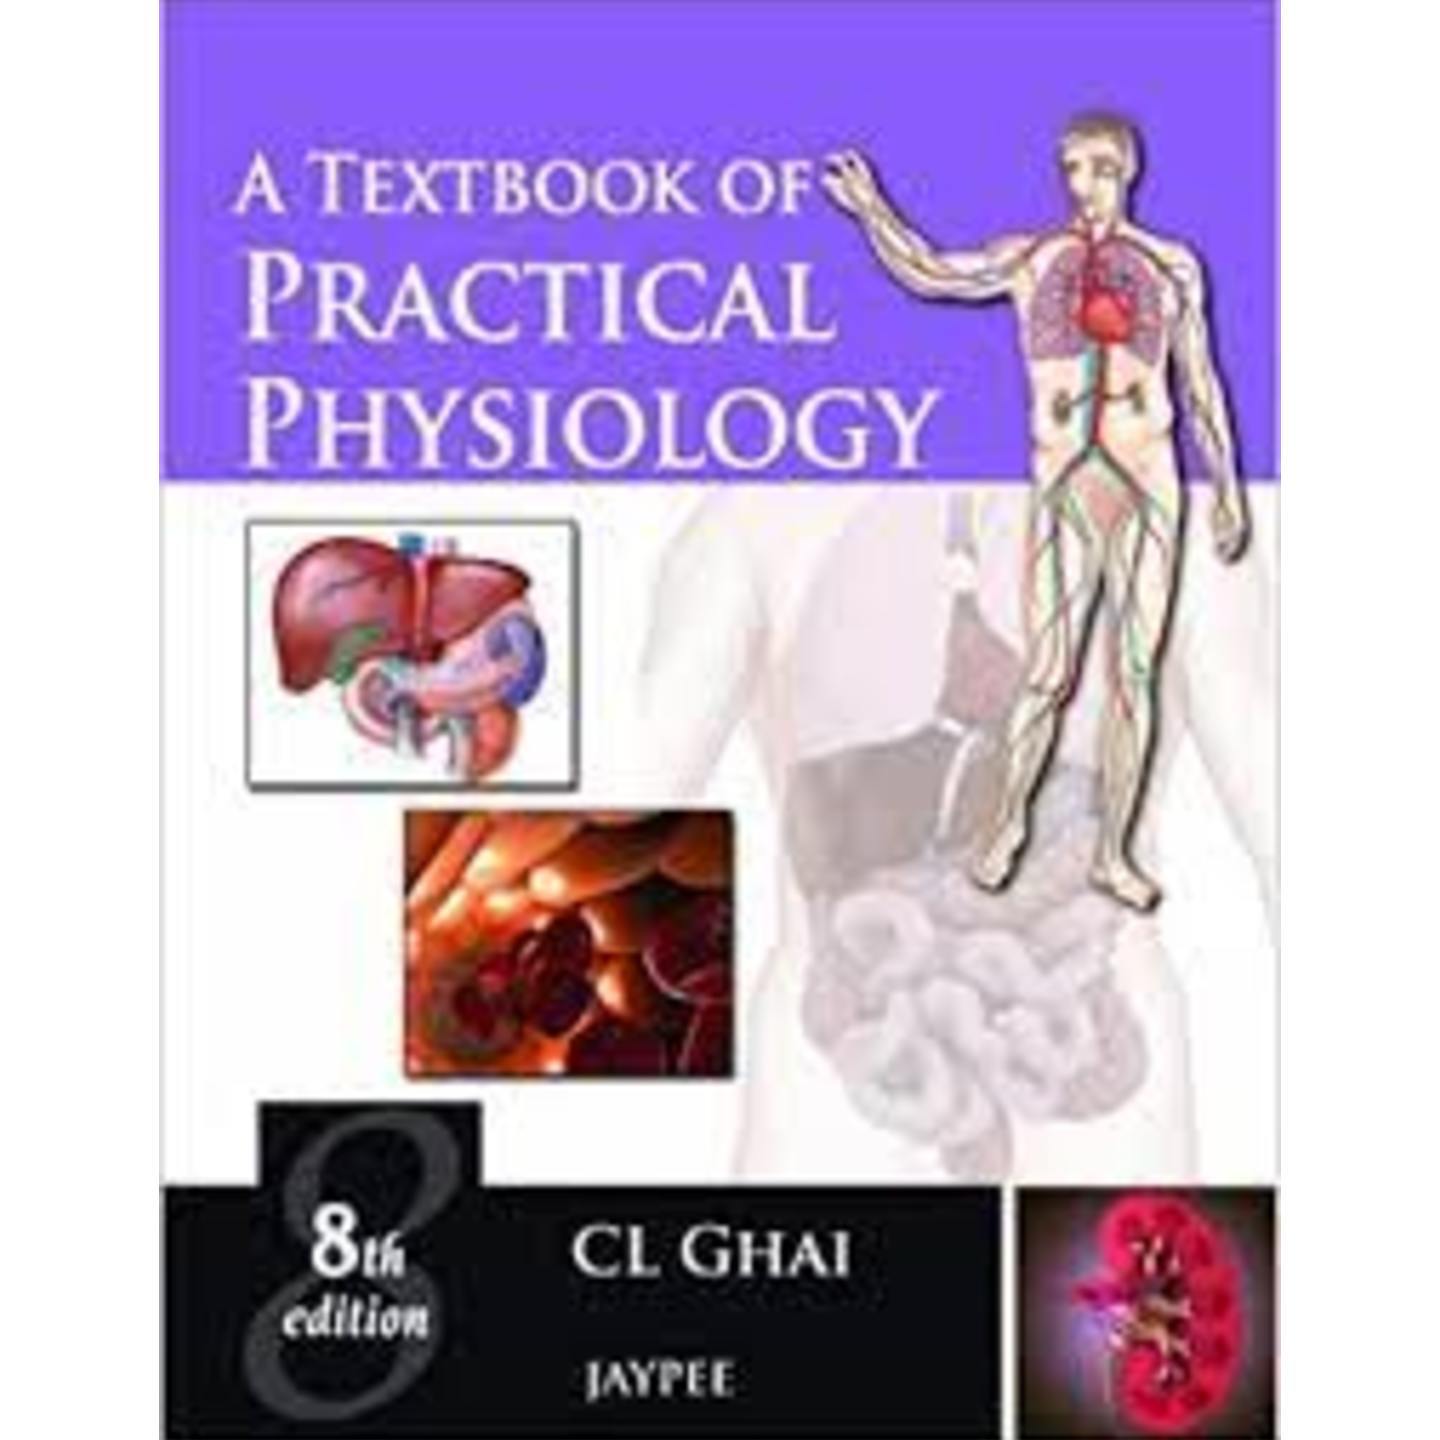 A Textbook of Practical Physiology  (English, Paperback, Ghai CL)